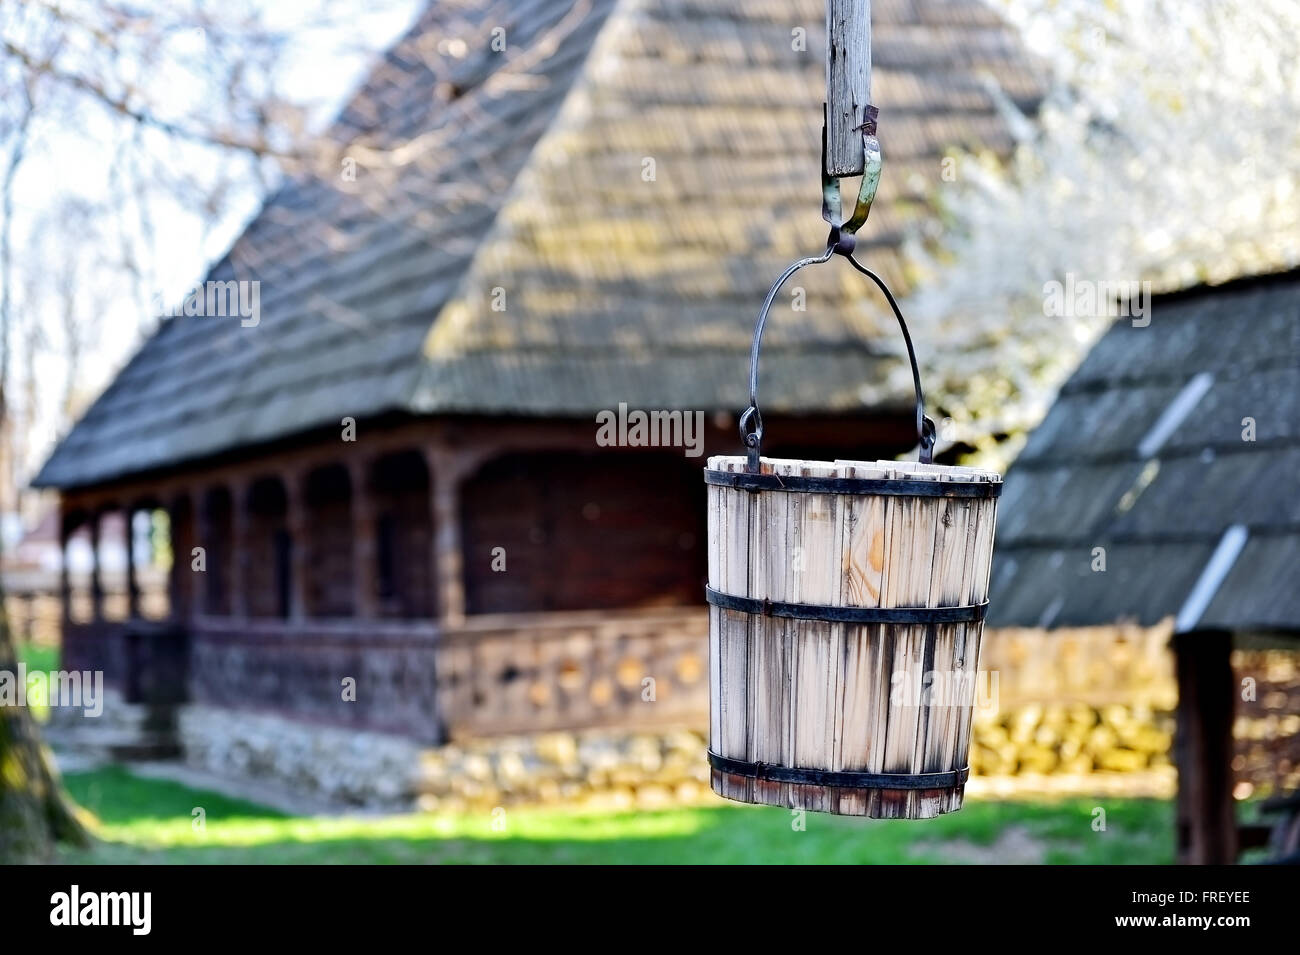 Wooden fountain bucket detail with rural spring scenery in background Stock Photo